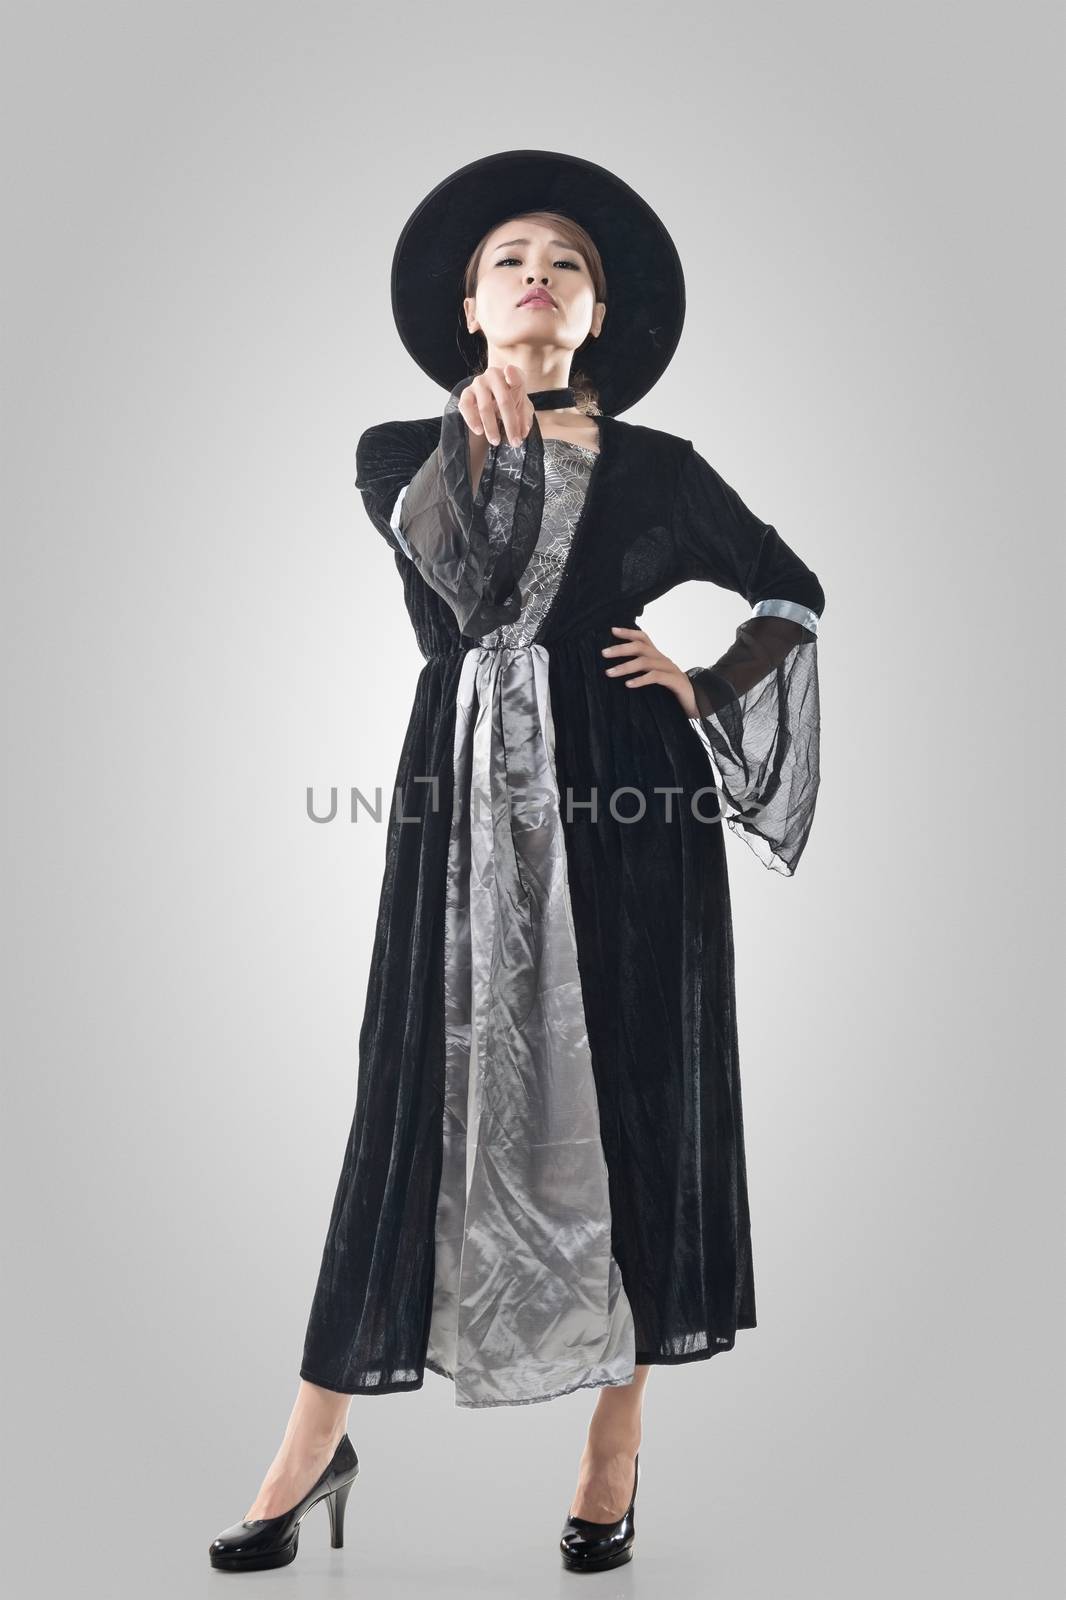 Asian witch woman, full length portrait.